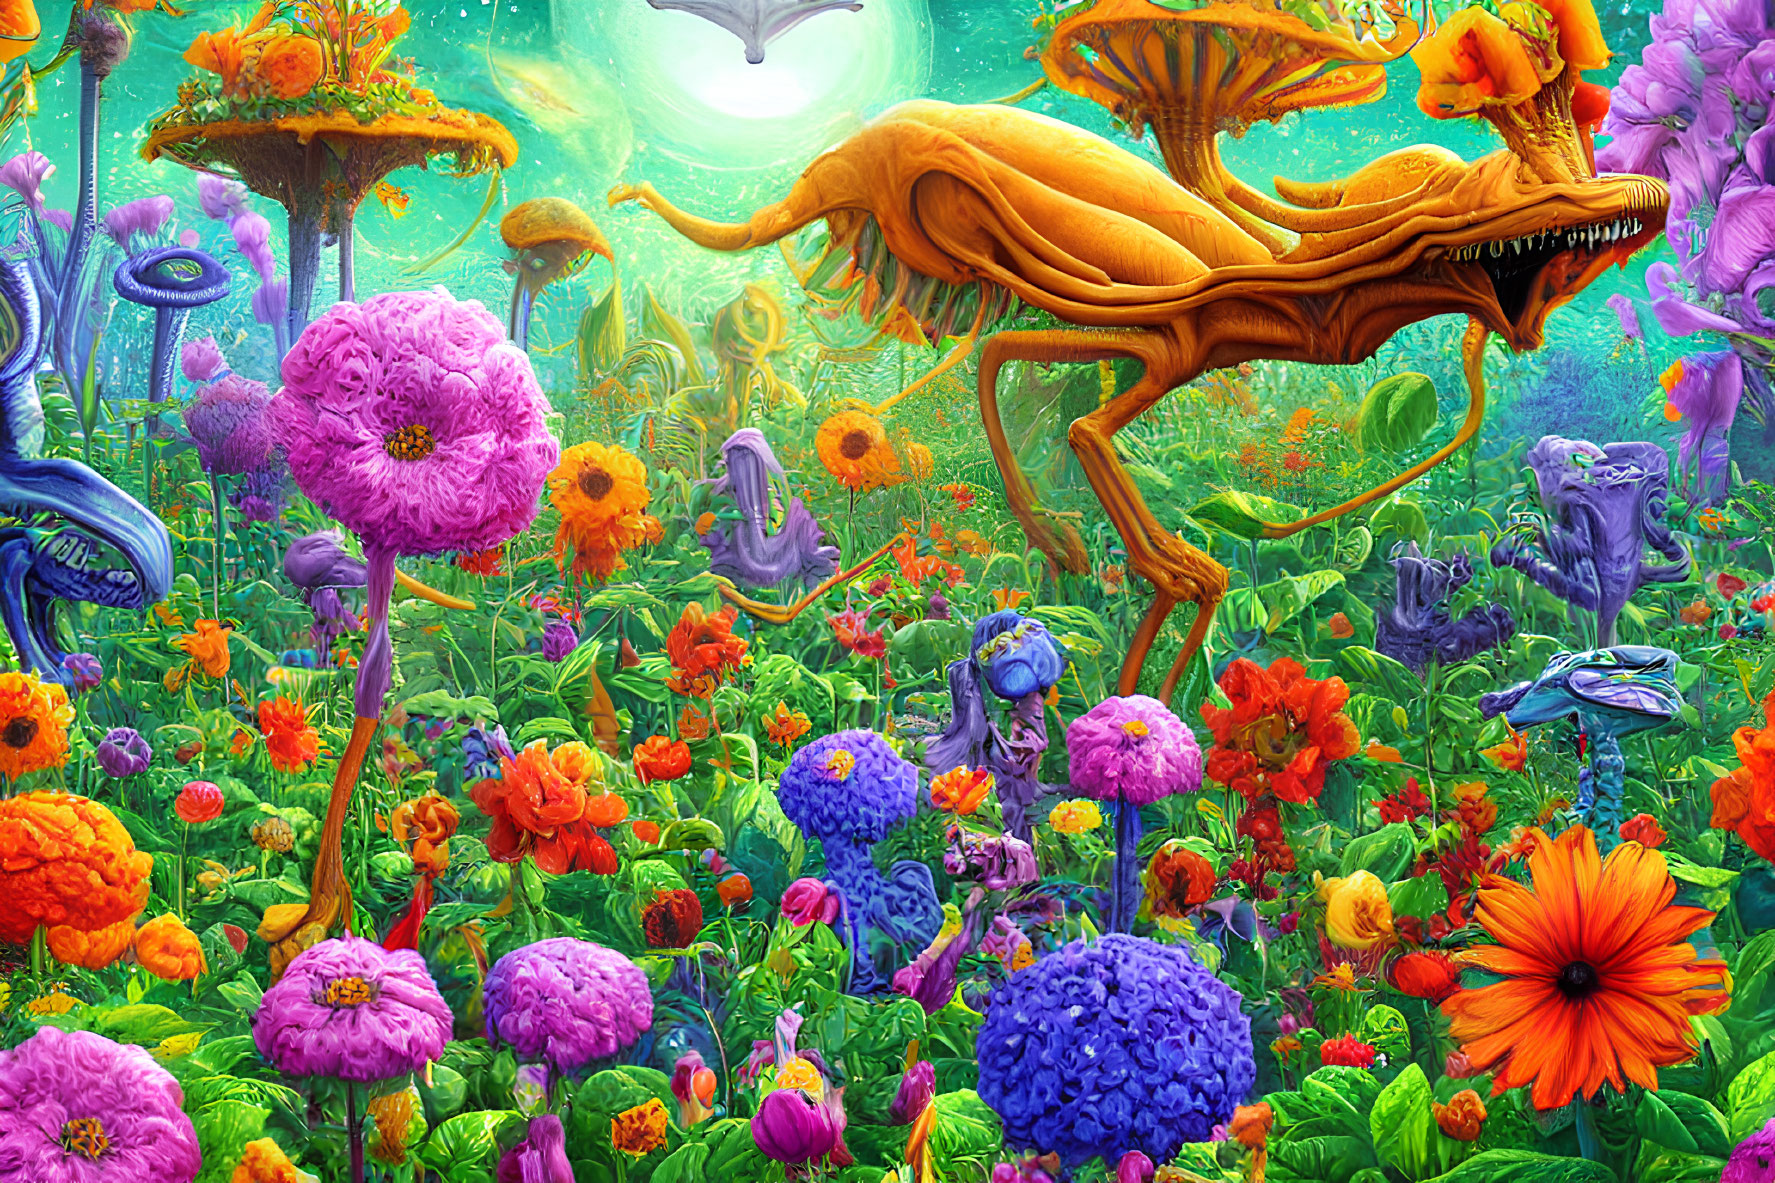 Fantasy garden with colorful flowers and mythical creatures